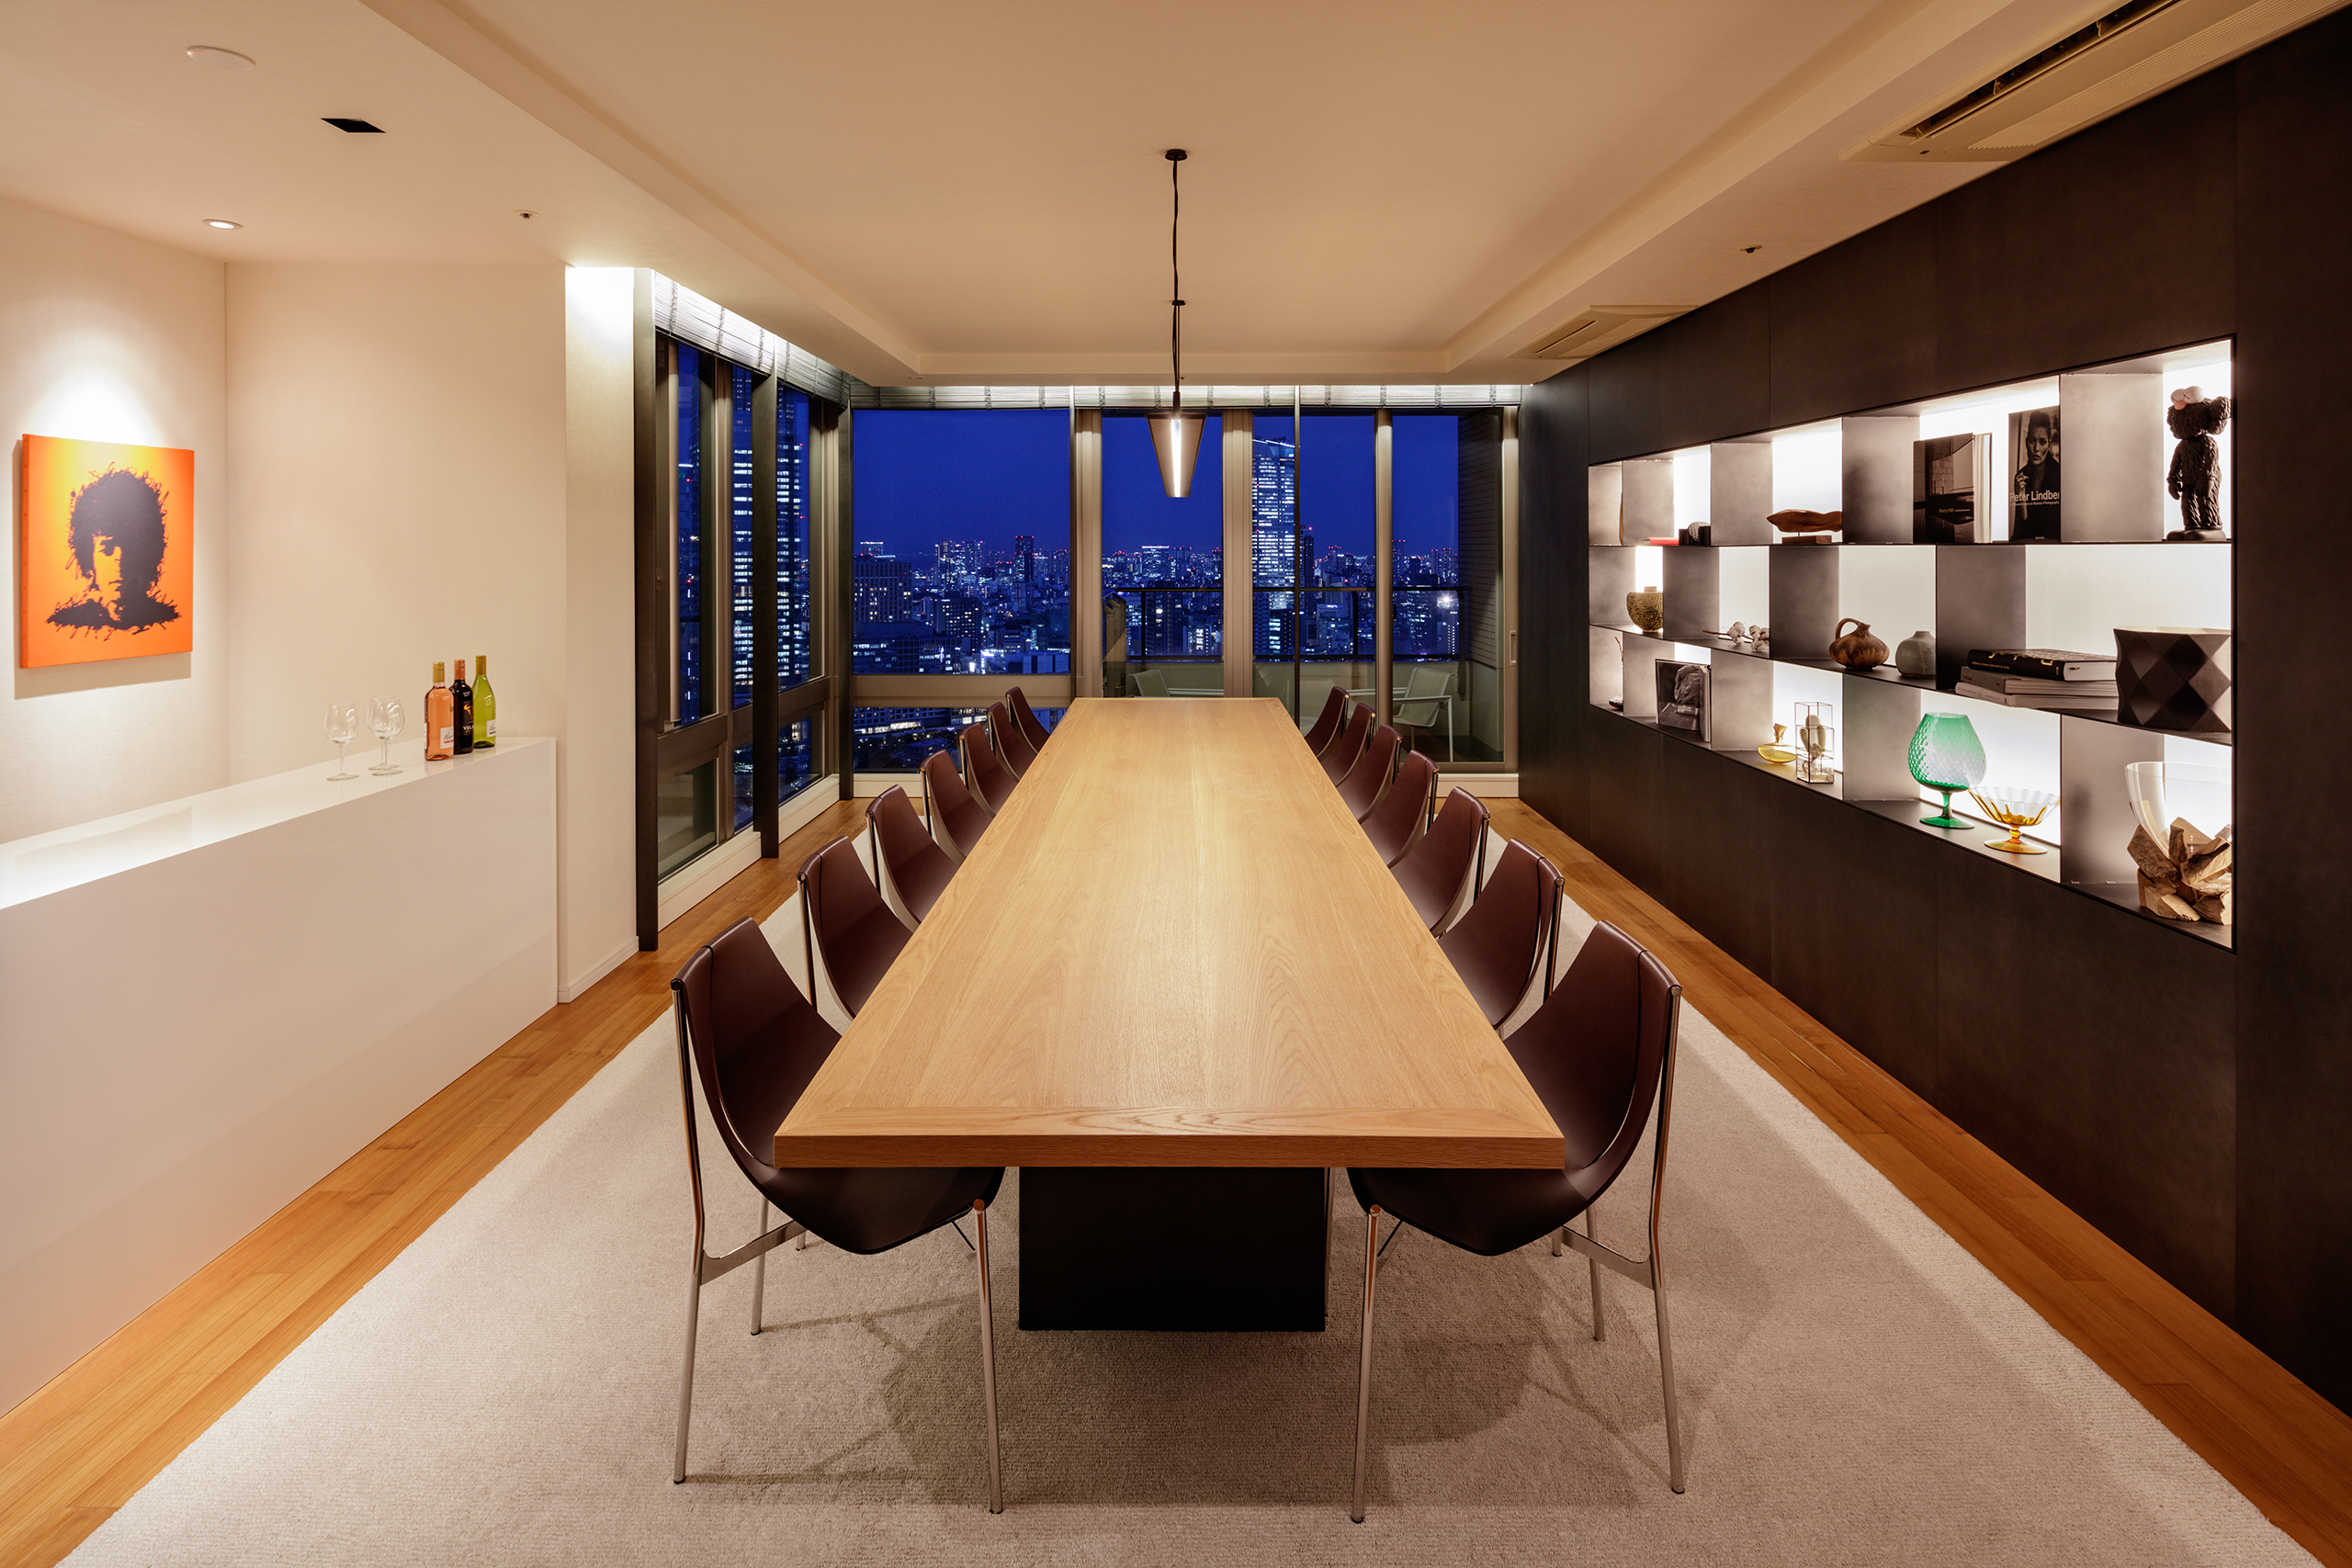 A meeting room where hip peoplenotions would gather. Aoichi Office Meeting Room Large Table